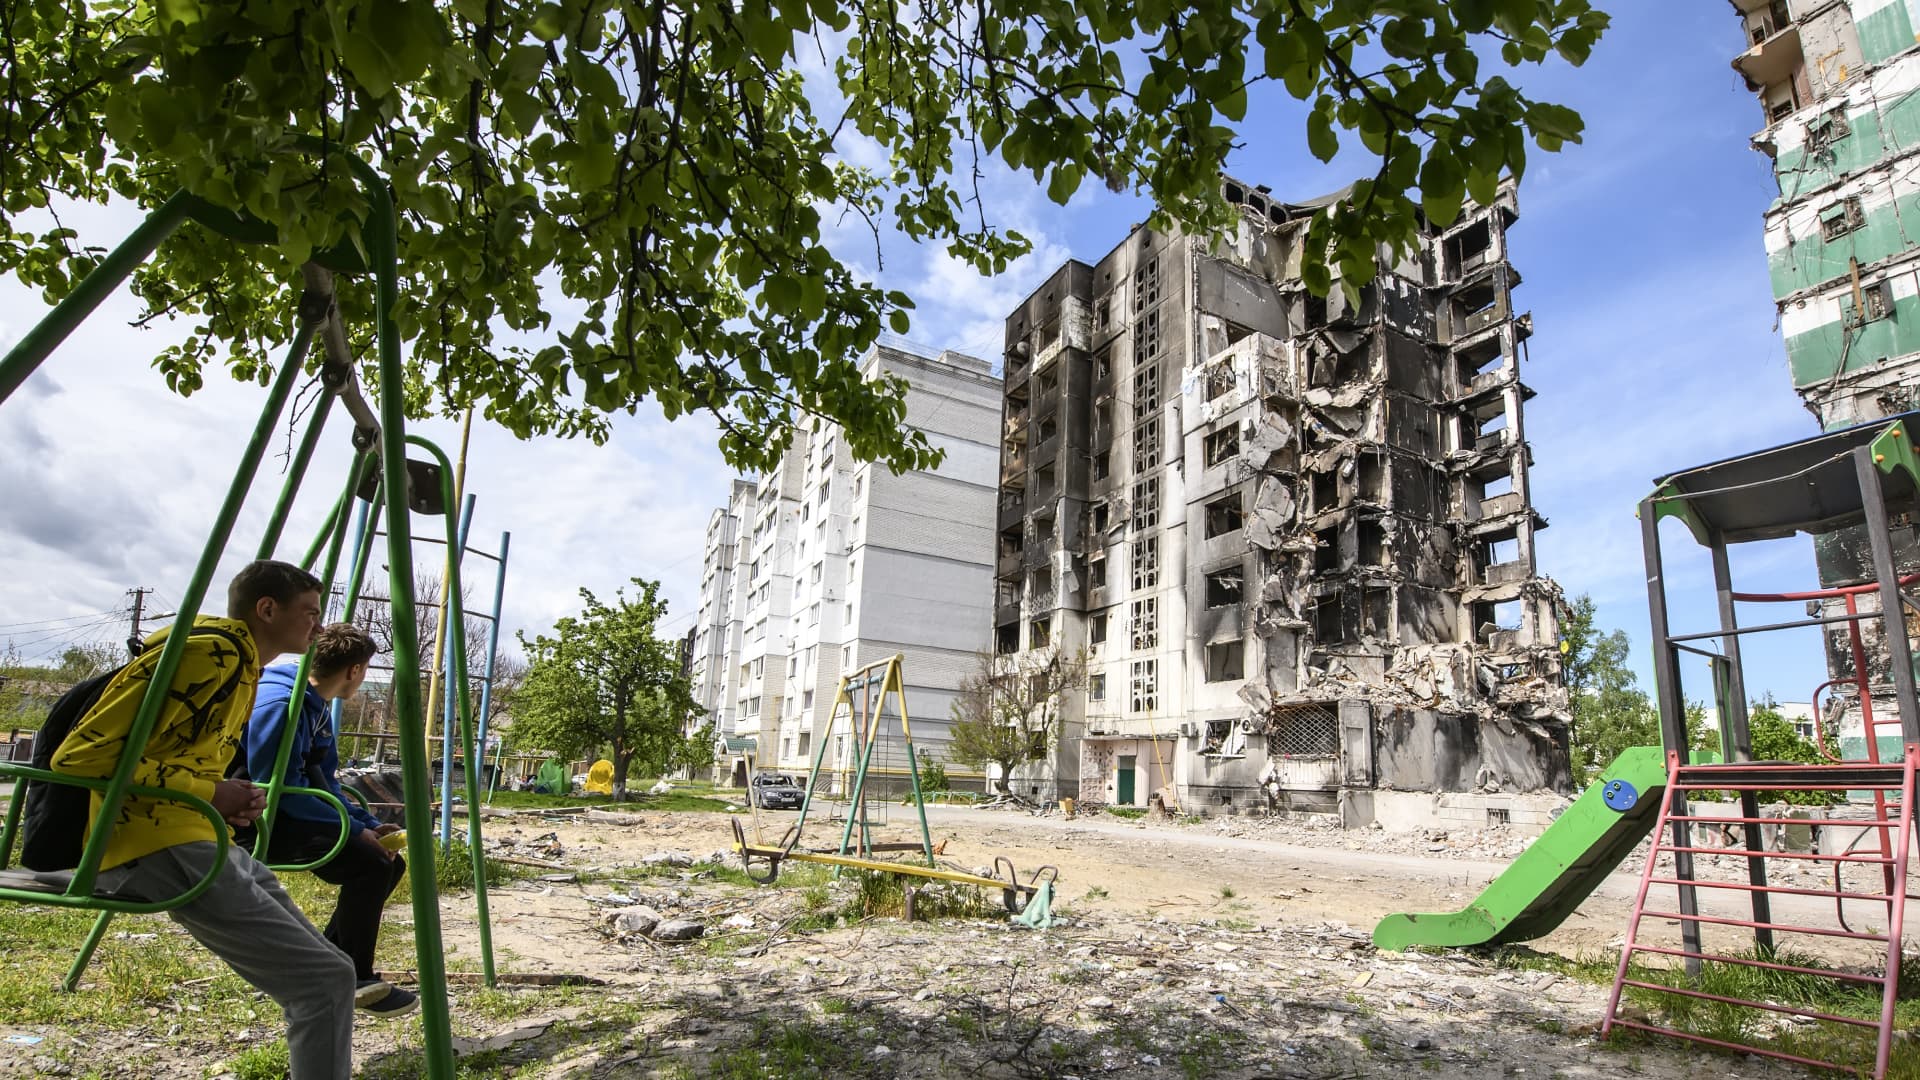 Local boys sit on a swing in the yard of an apartment building destroyed by the Russian army airstrike in Ukraine May 13, 2022. The war in Ukraine is expected to continue through the summer and possibly beyond, presidential advisor Oleksii Arestovych said, cited by NBC News.